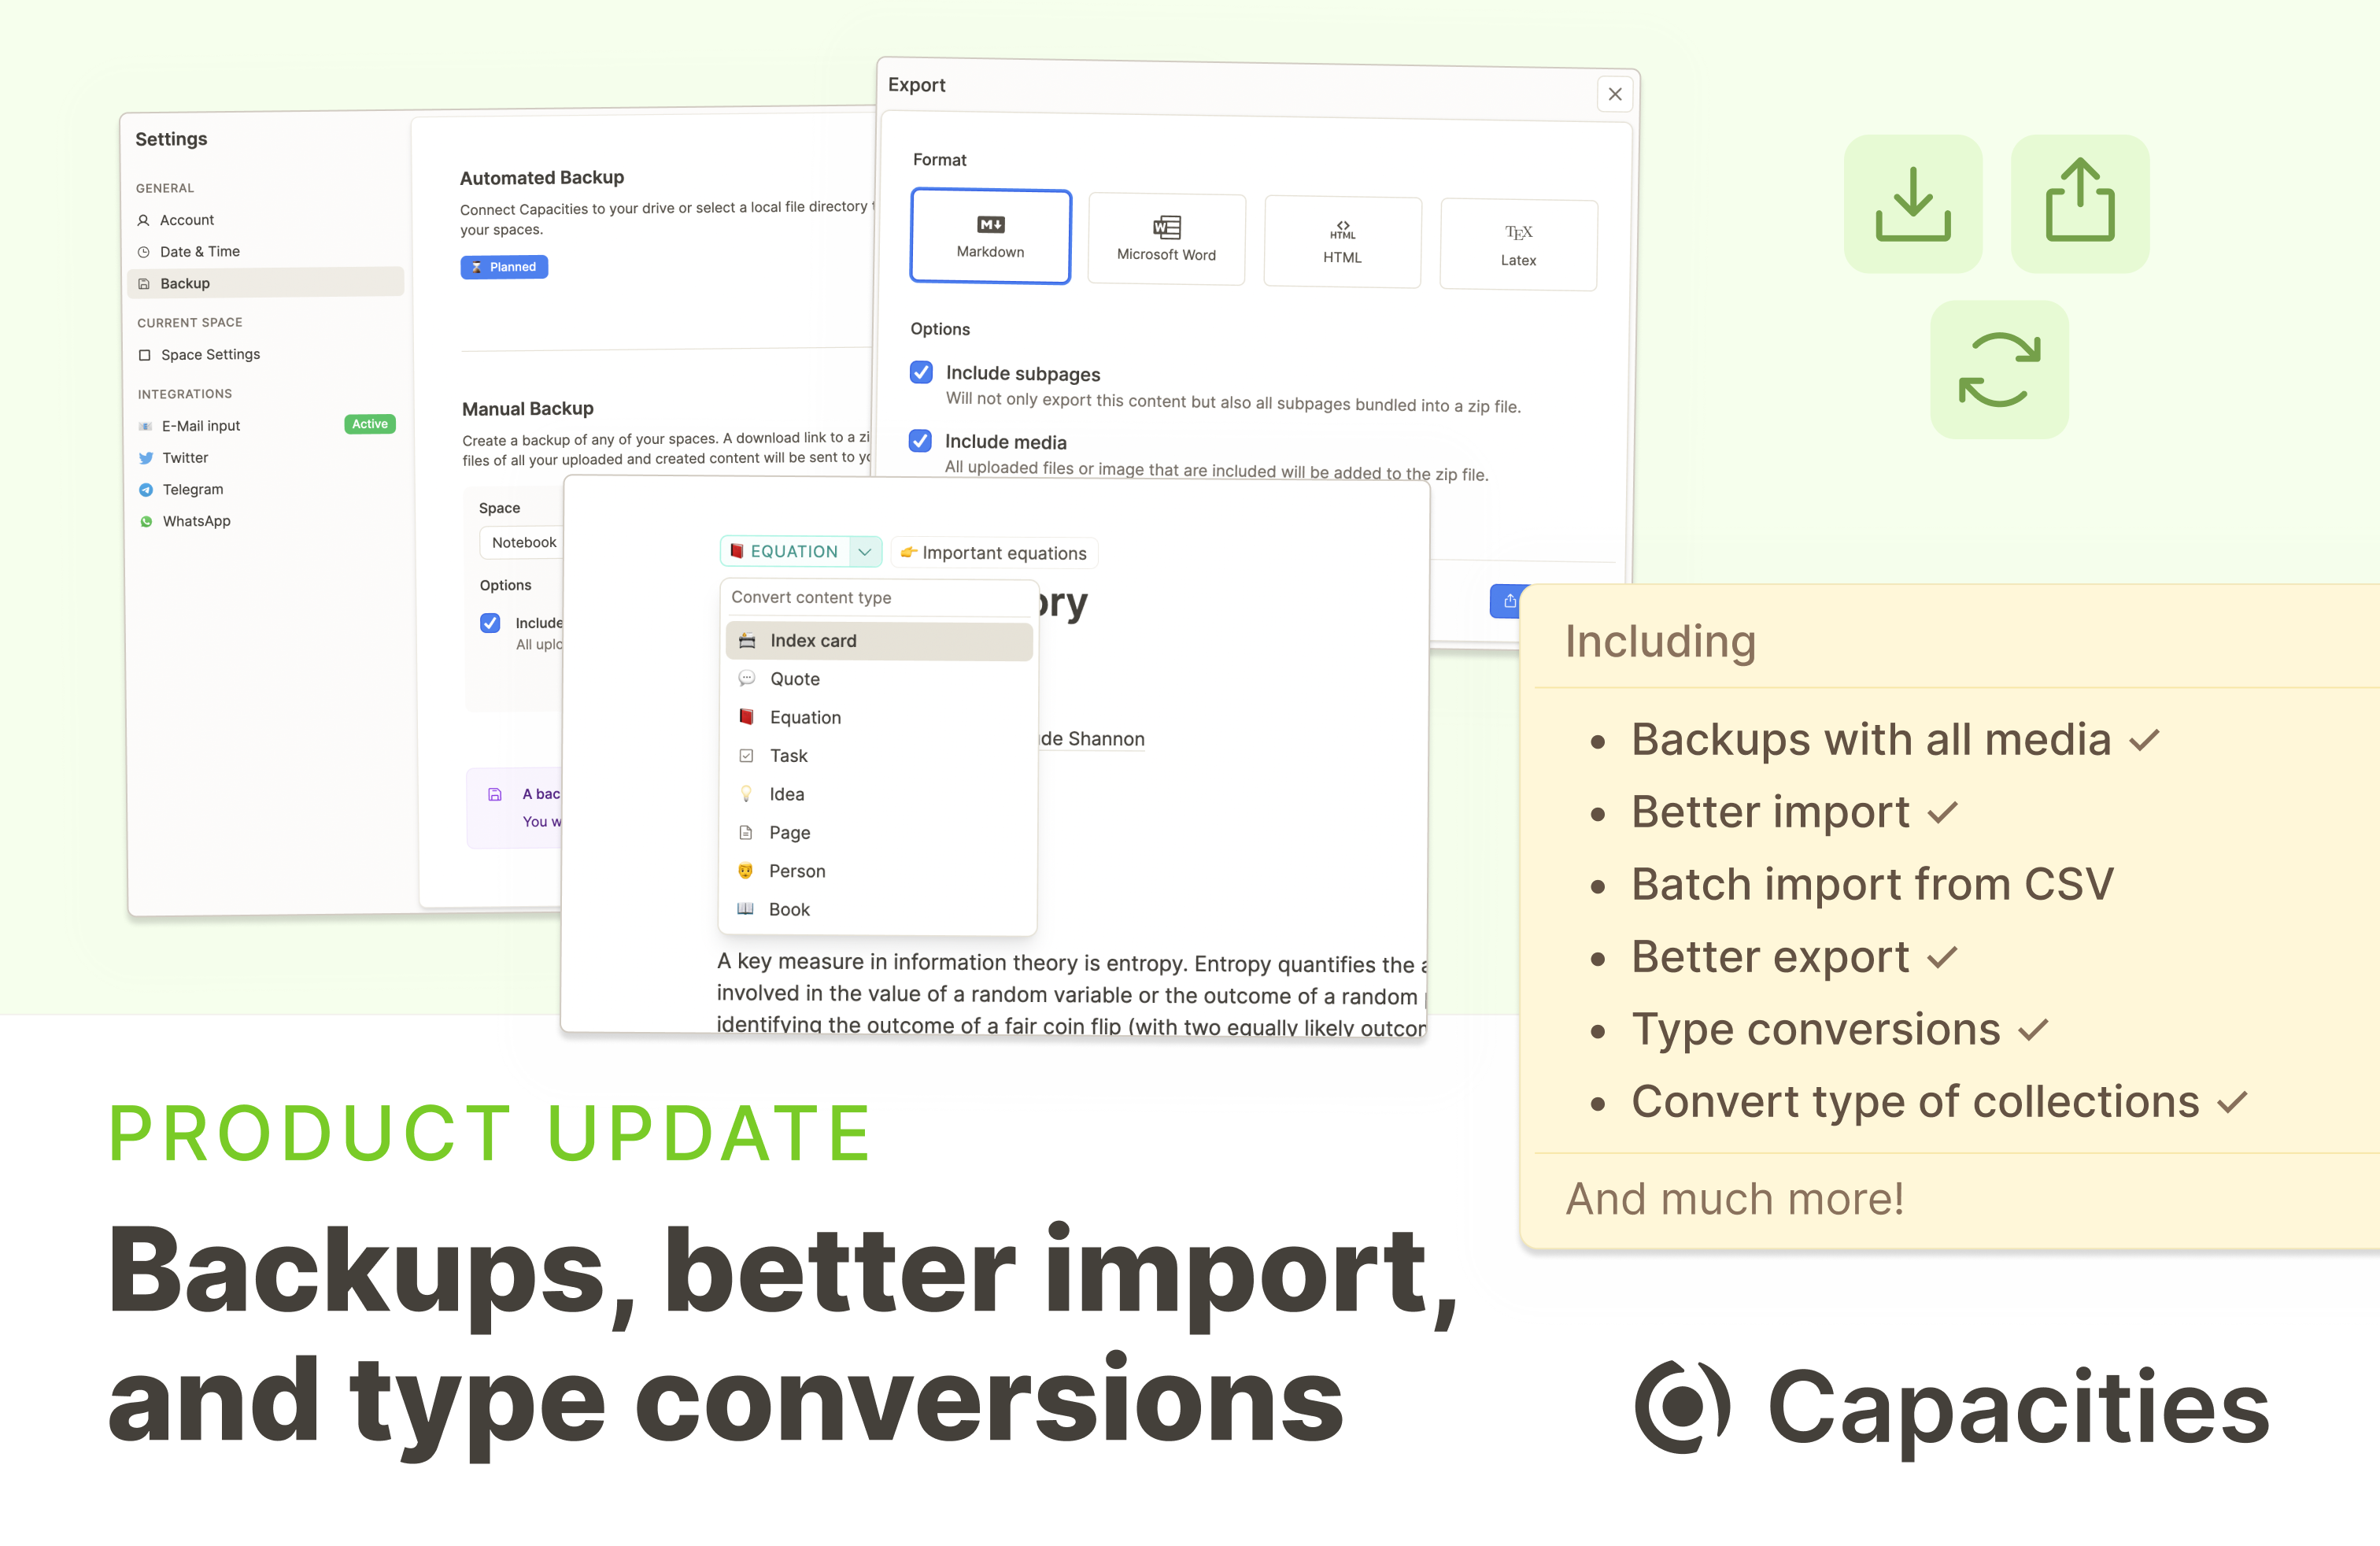 Backups, better import, and type conversions